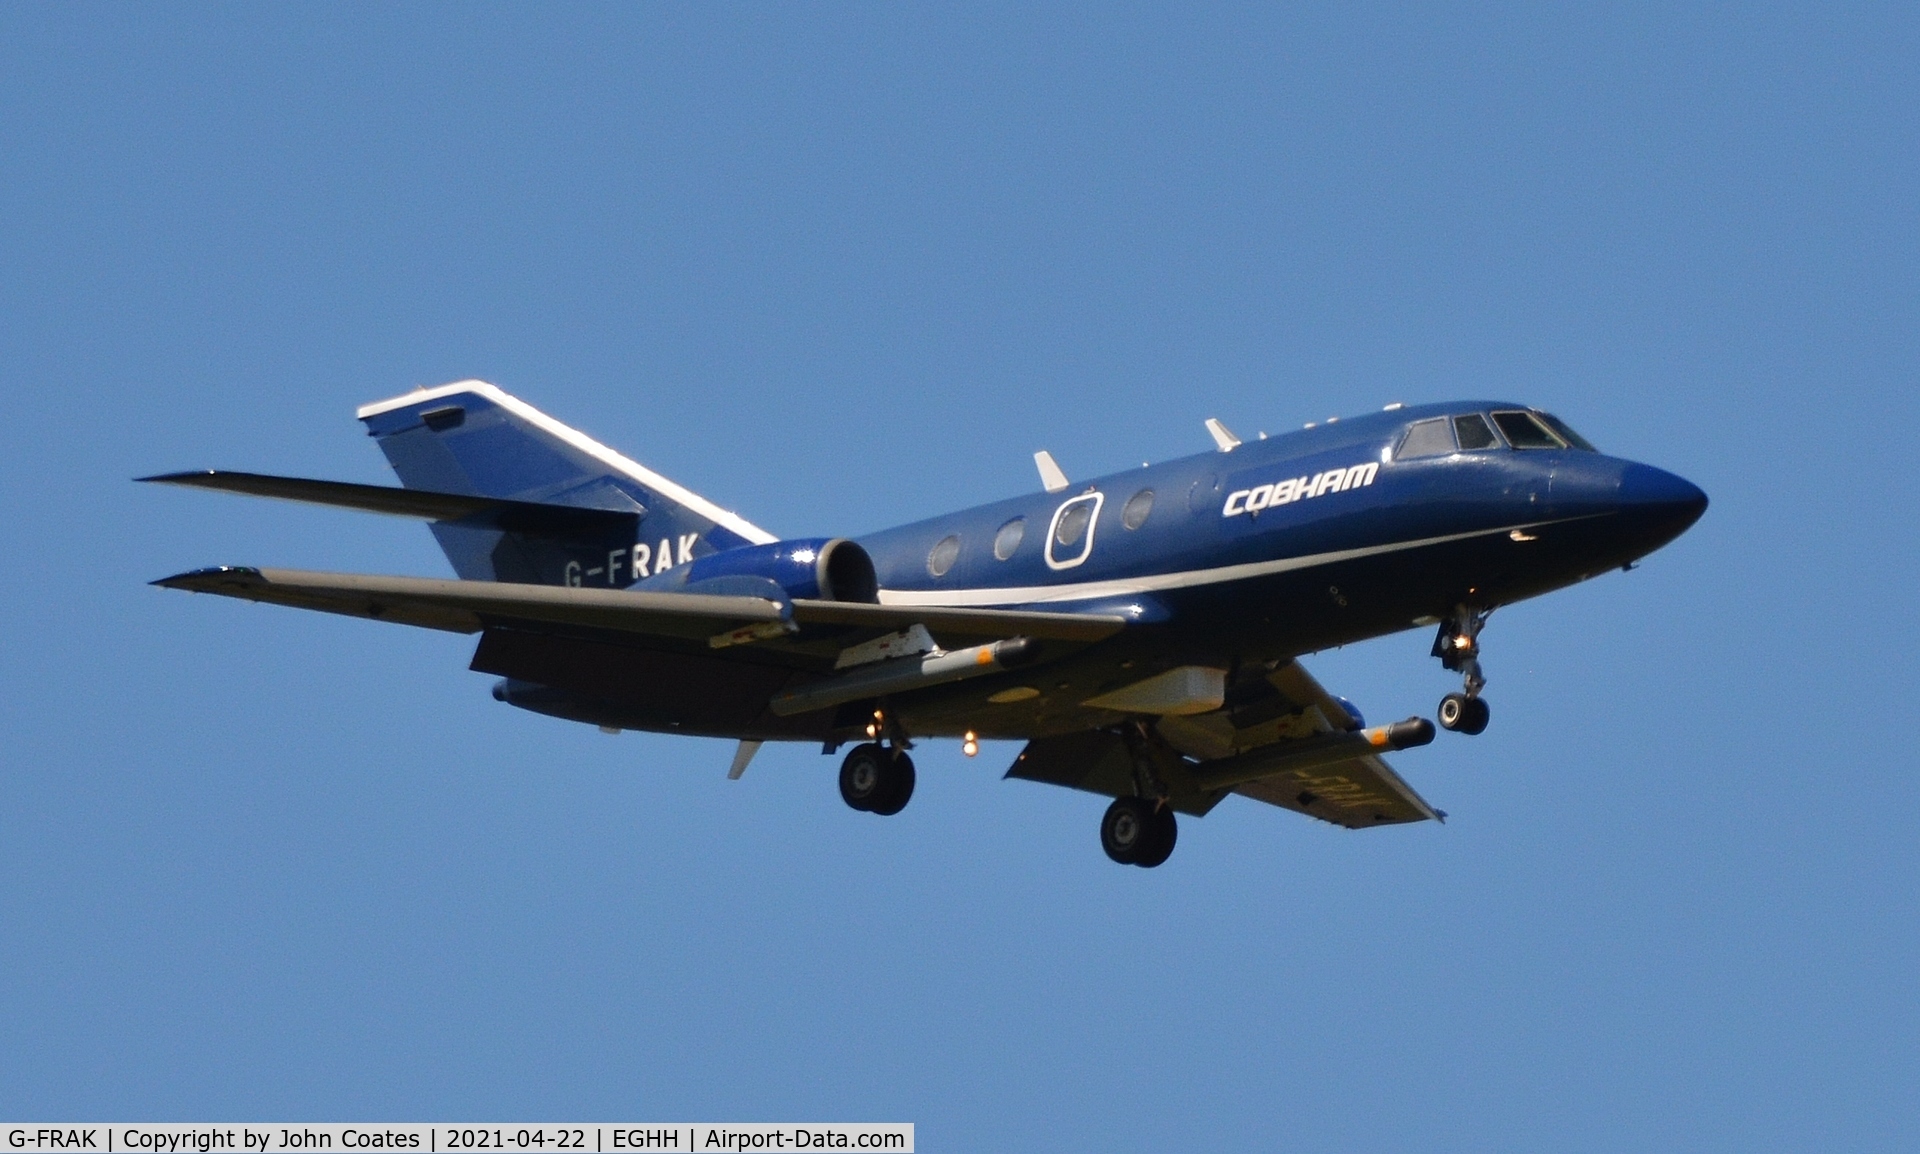 G-FRAK, 1969 Dassault Falcon 20D C/N 213, Finals to 08 with old Cobham titles soon to be Draken